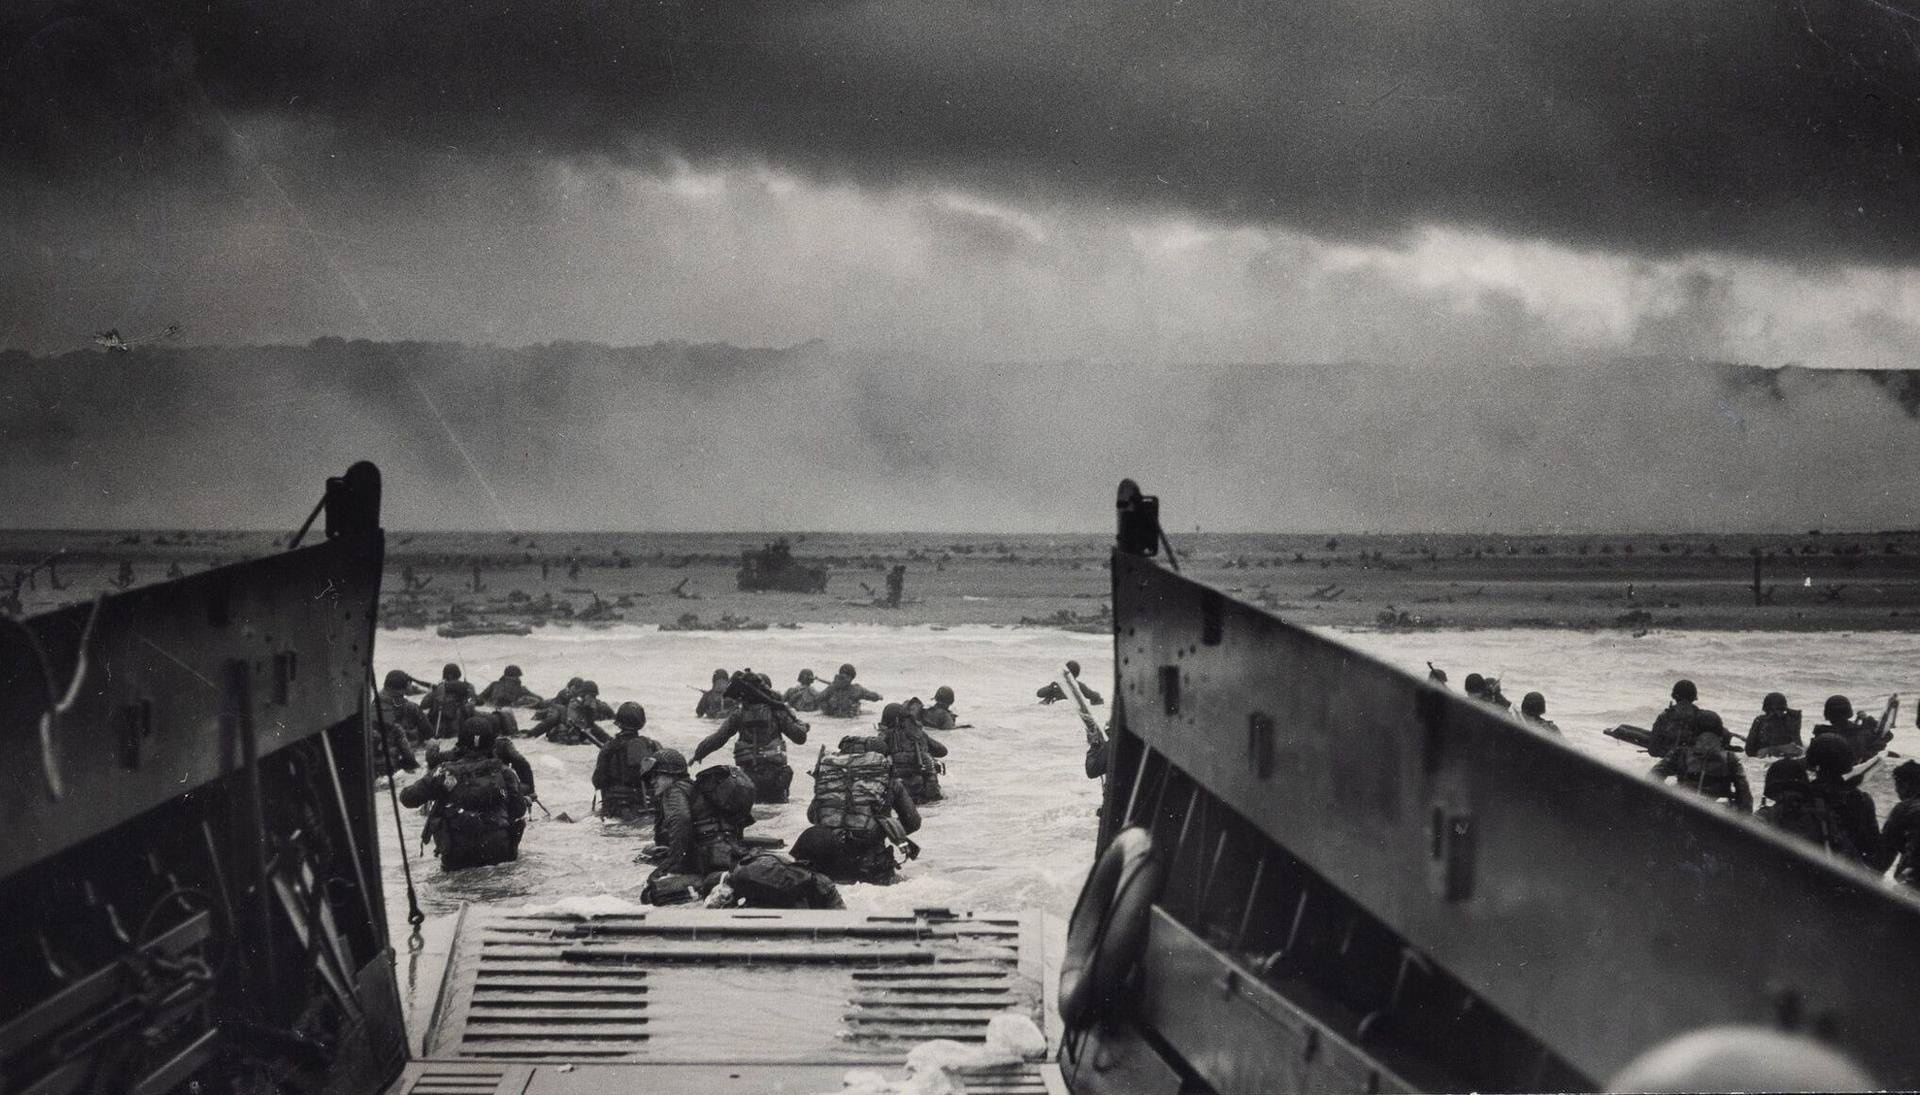 On D-Day anniversary, 'Into the Jaws of Death' remains among greatest wartime photos 